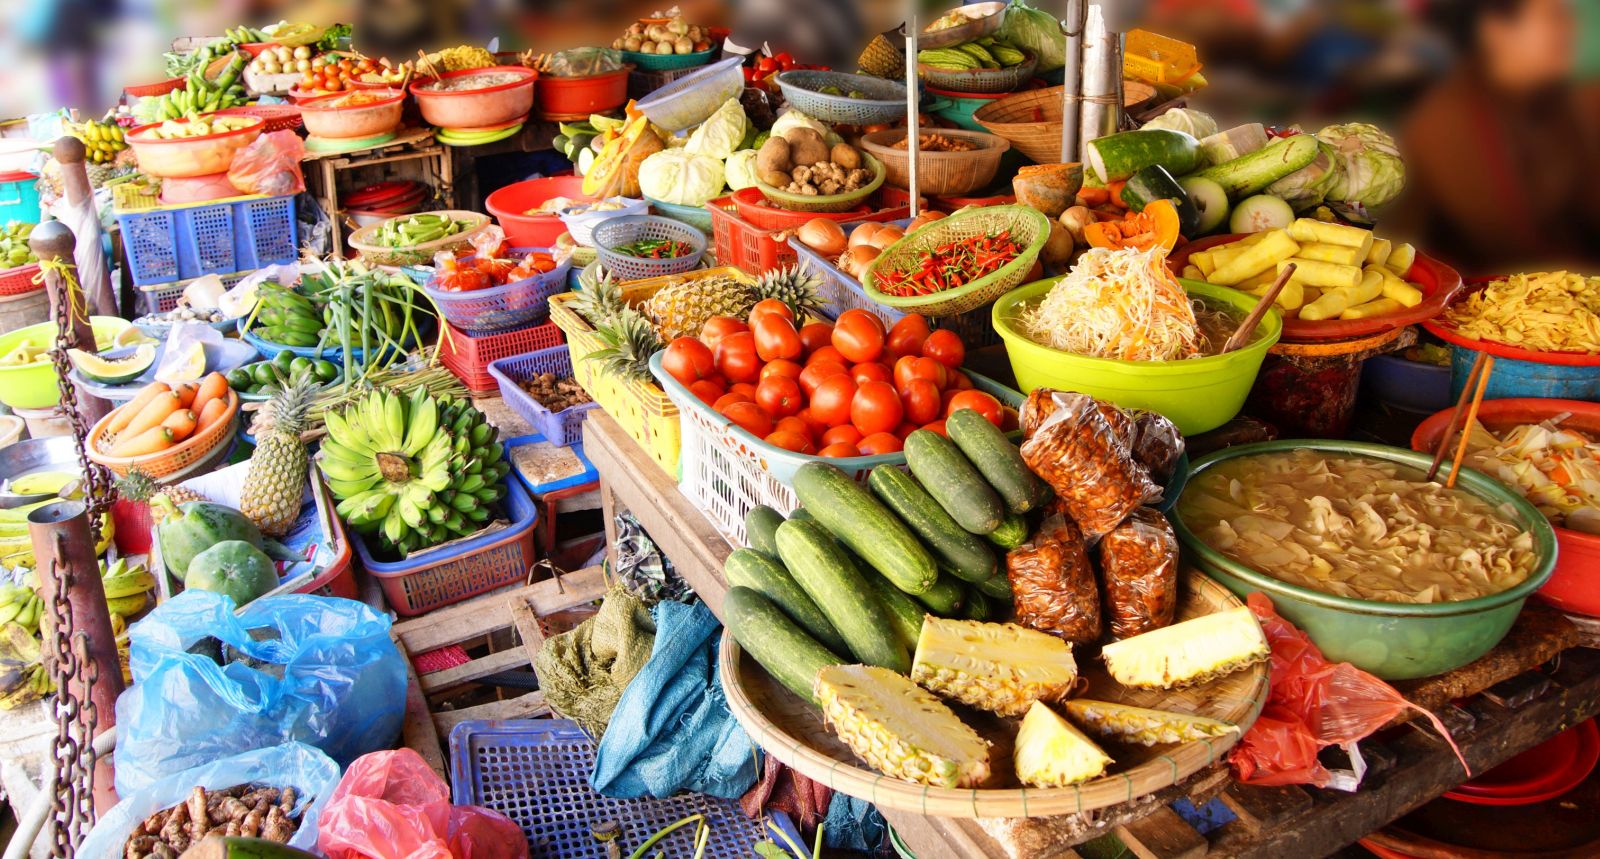 Colourful fruit and vegetable stall at a market in Hoi An in Vietnam